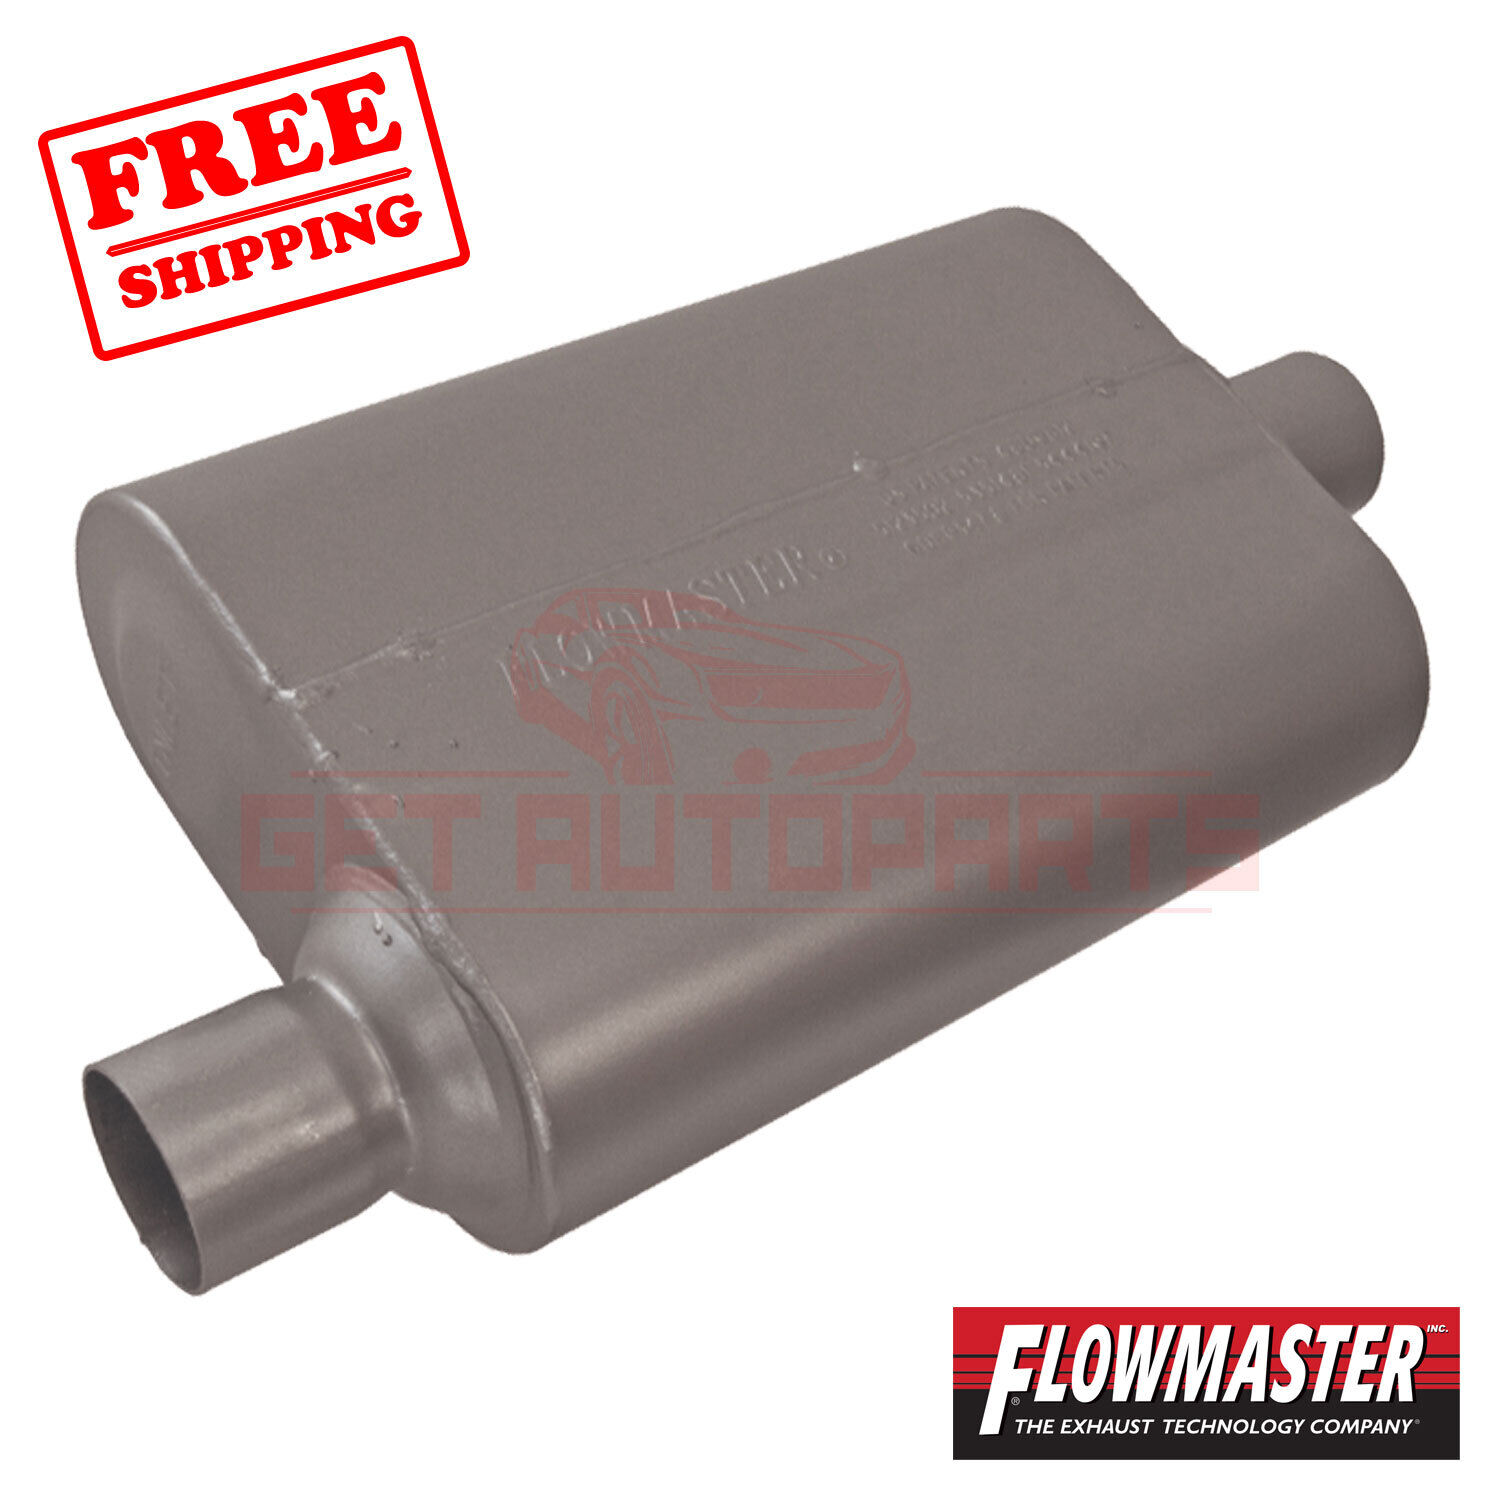 FlowMaster Exhaust Muffler for 1962-70 Plymouth Belvedere